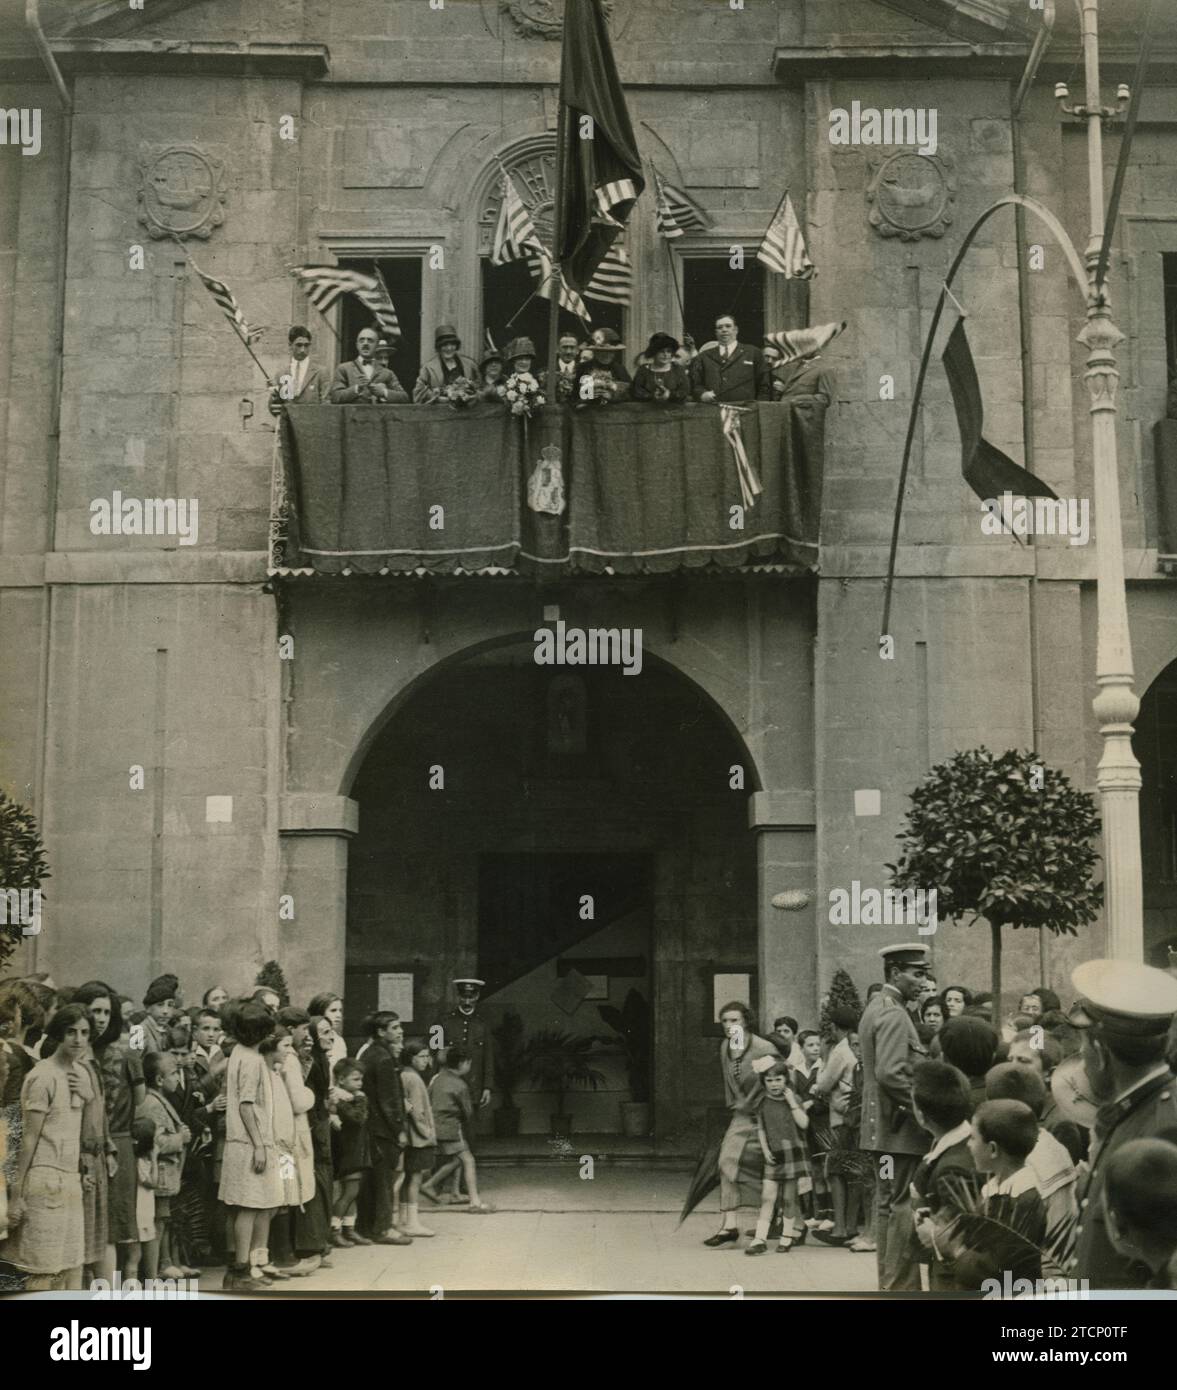 Avilés, August 1924. Tribute to Pedro Menéndez. The commissioners of La Florida, with the authorities, on the balcony of the City Hall, corresponding to the acclamations of the people. Credit: Album / Archivo ABC / Pío Stock Photo